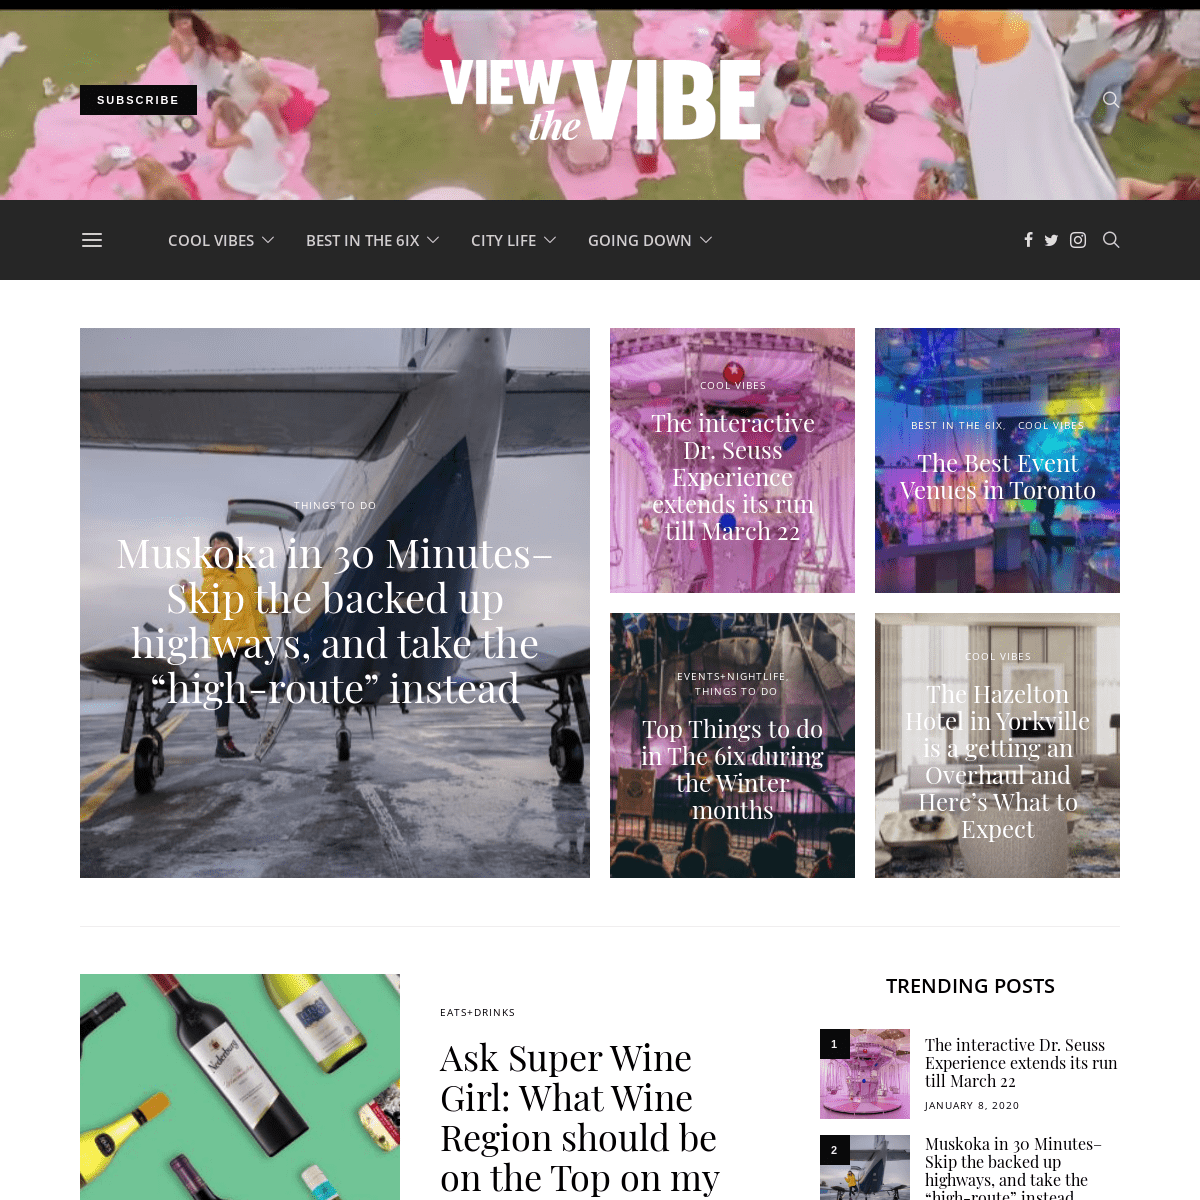 A complete backup of viewthevibe.com